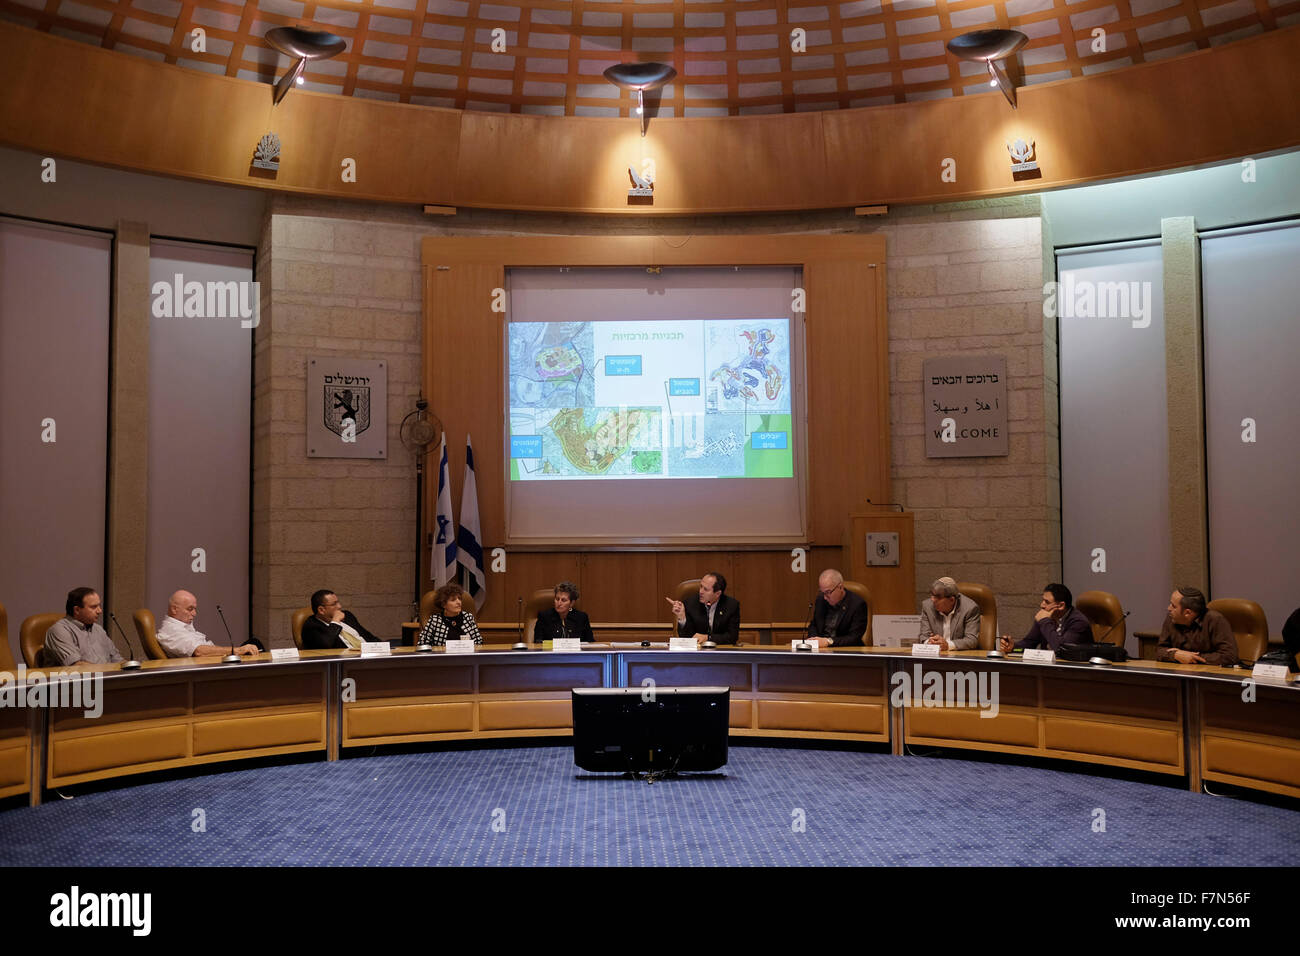 City council meeting in municipality hall of Jerusalem Israel Stock Photo